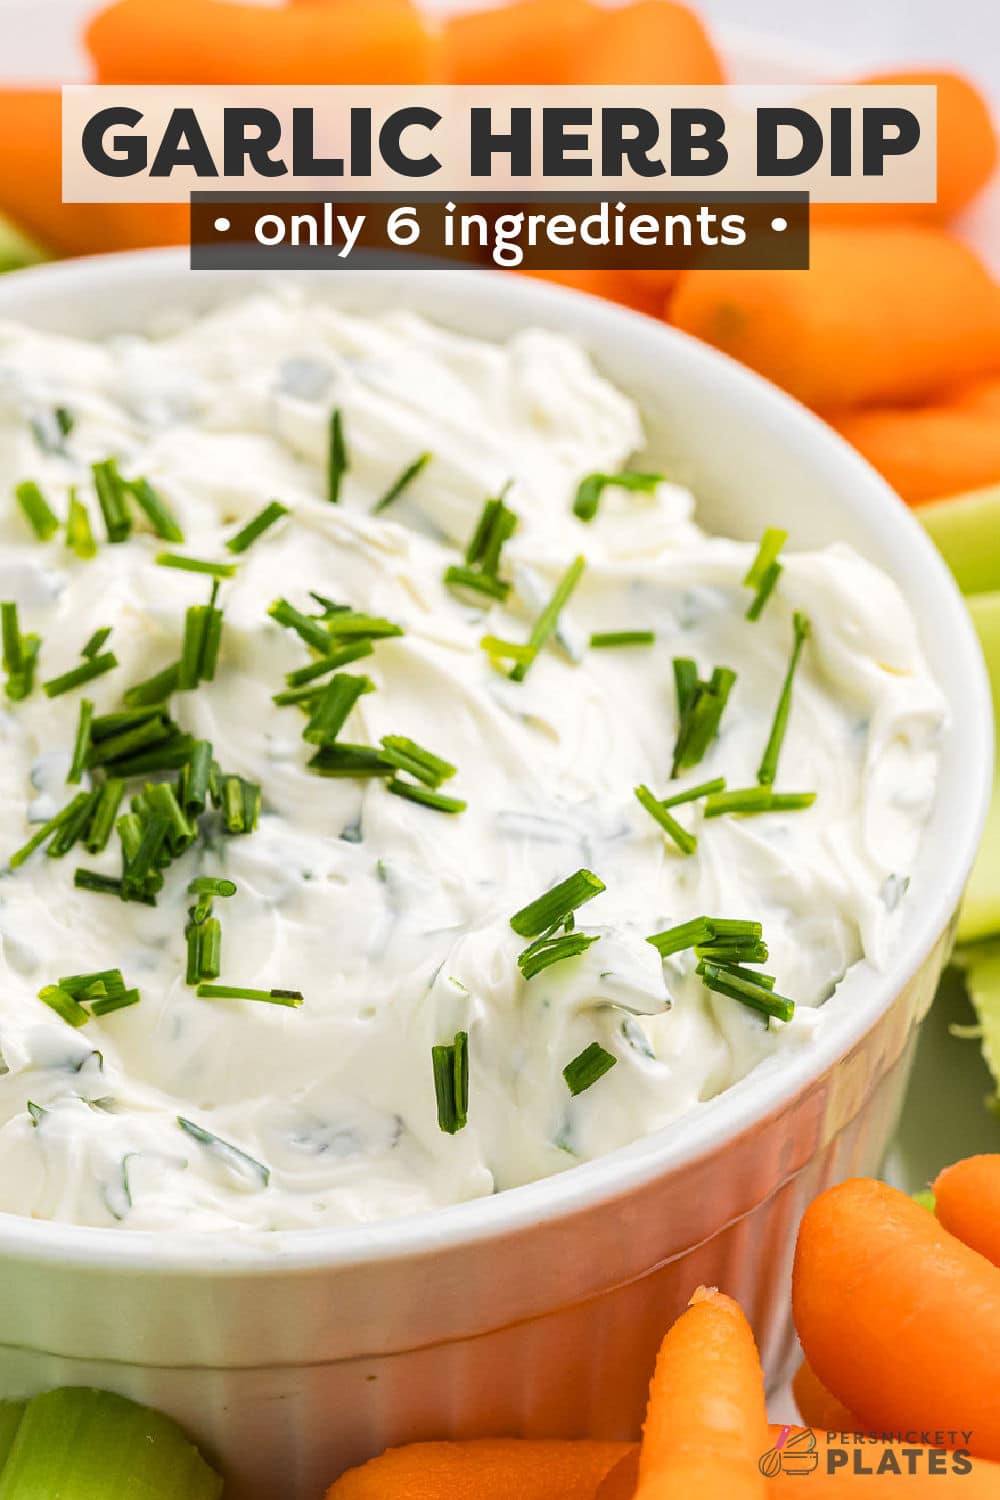 Garlic Herb Dip starts with a cream cheese base and then is filled with fresh herbs. Pair this super easy dip recipe with crackers, chips, or veggies to make the perfect quick snack for your next party or game day. | www.persnicketyplates.com